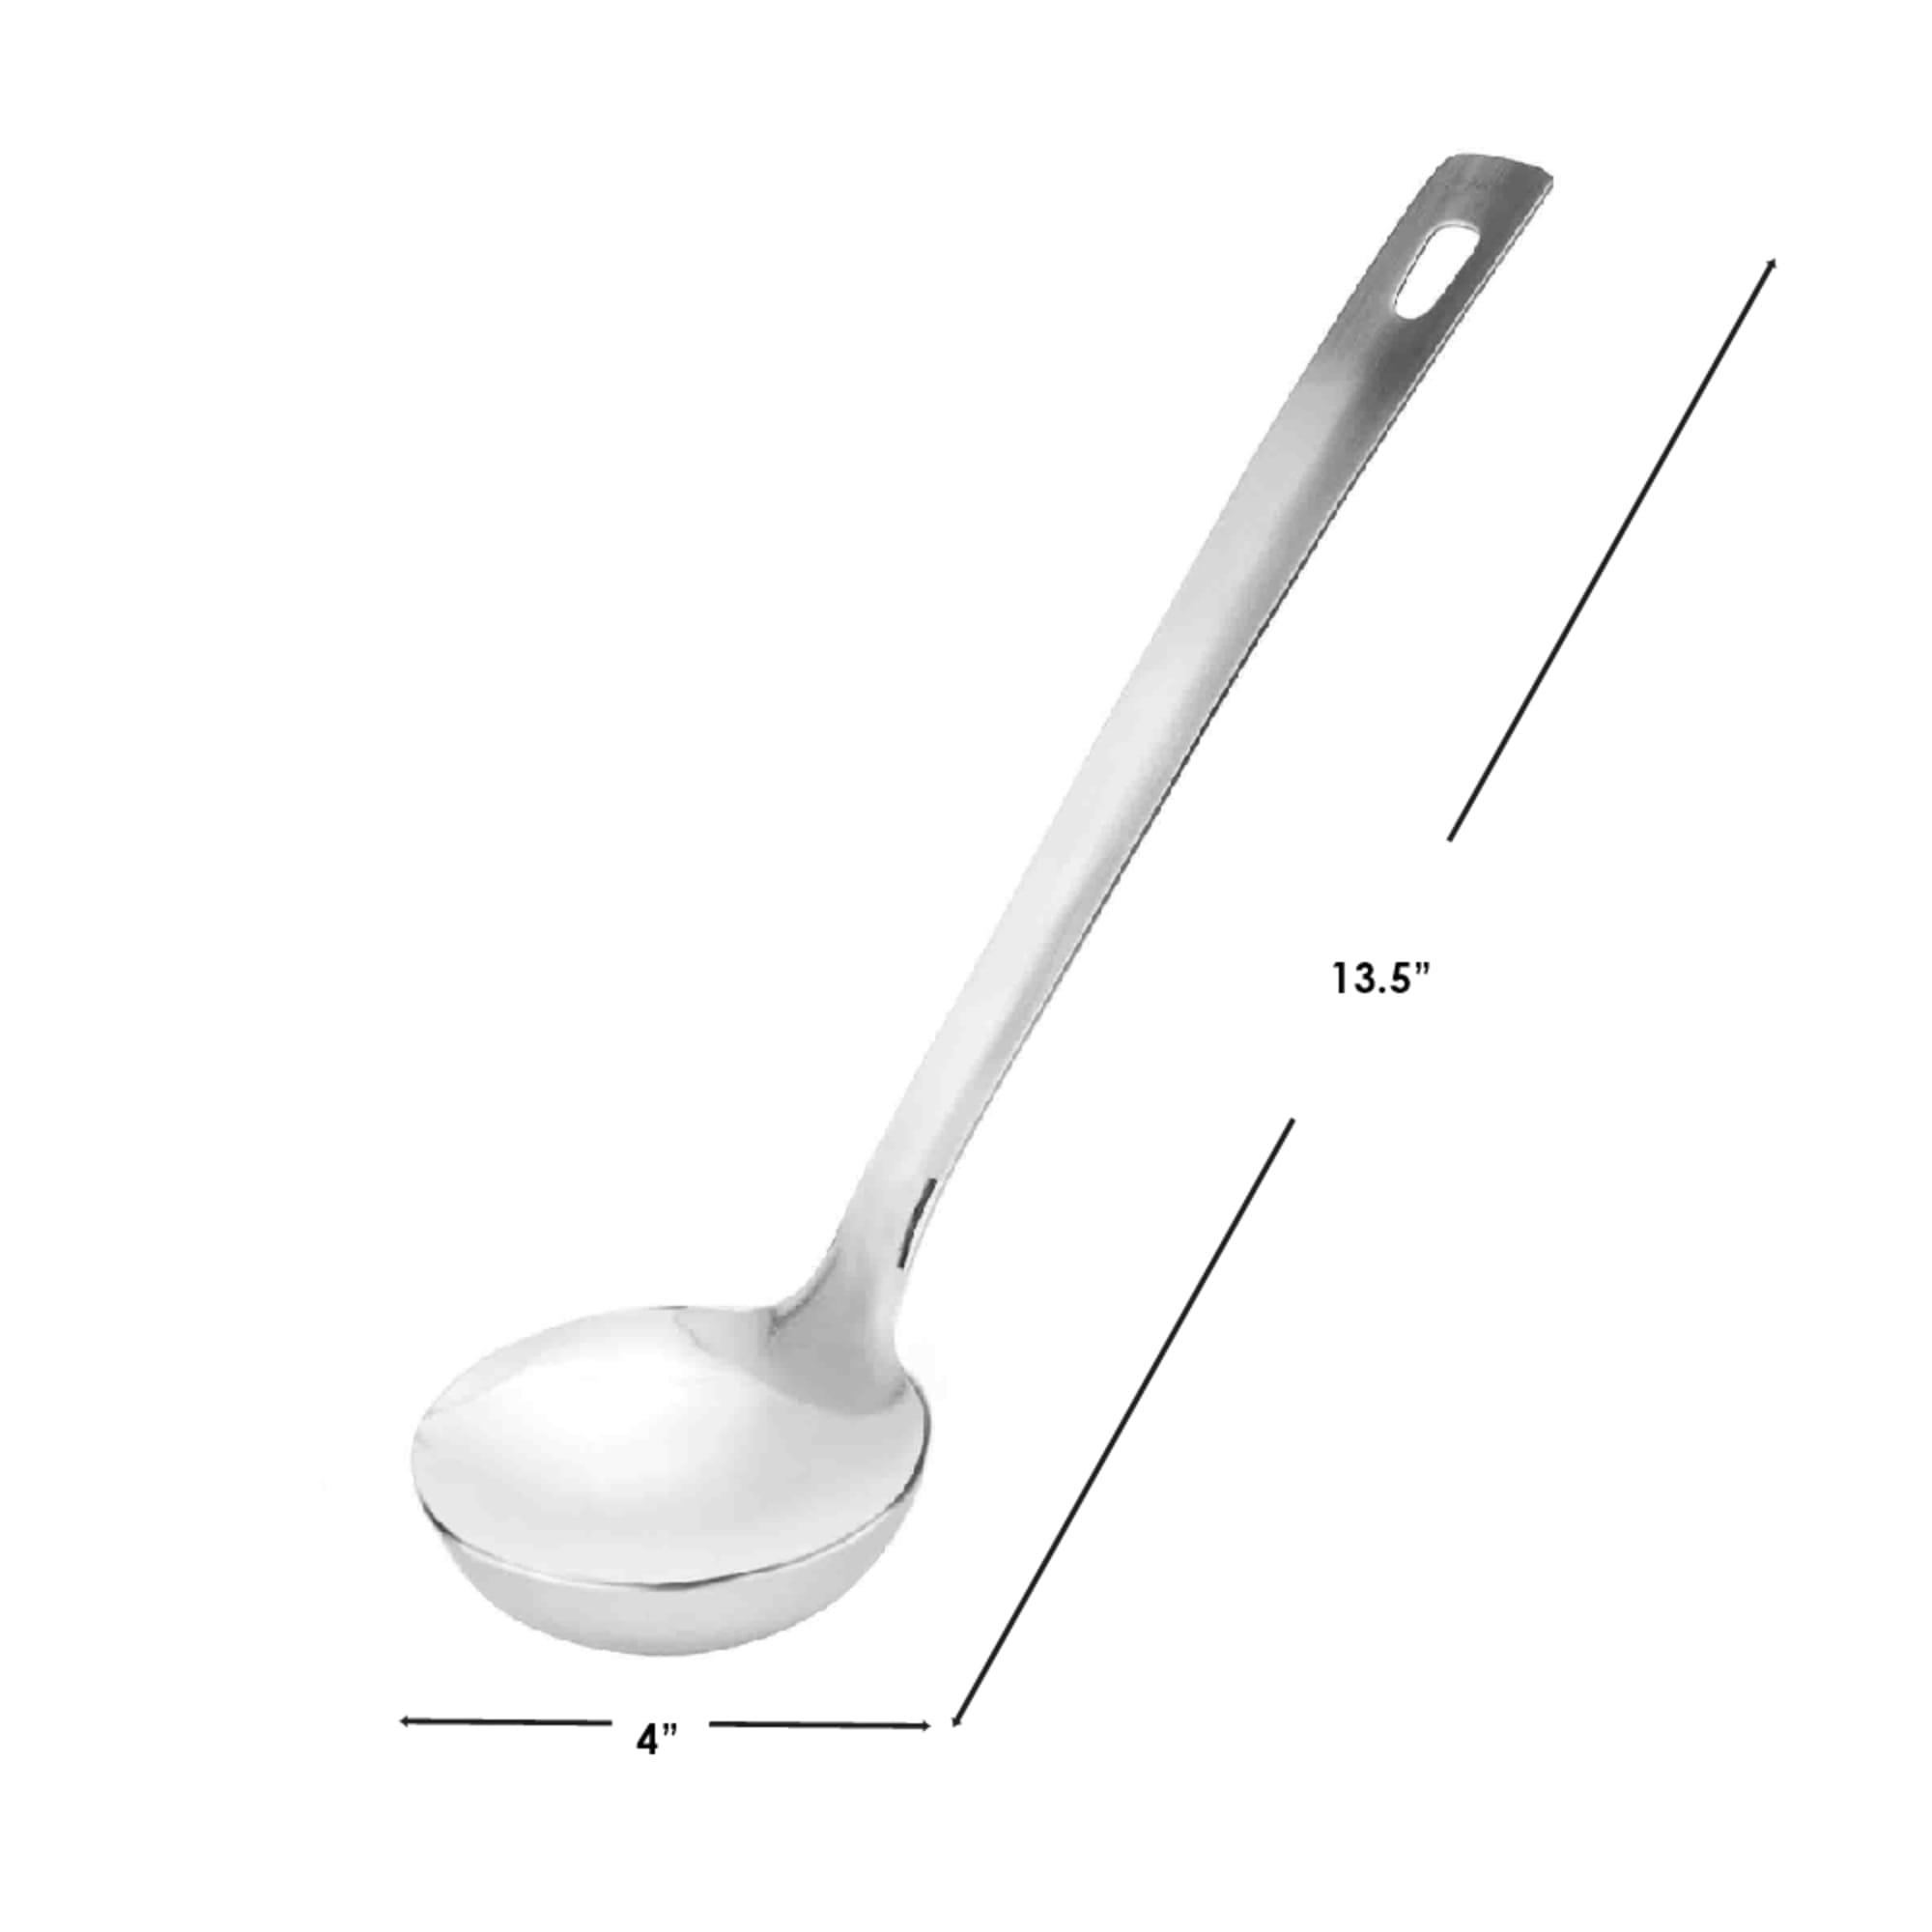 Home Basics Stainless Steel Ladle, Silver $3.00 EACH, CASE PACK OF 24